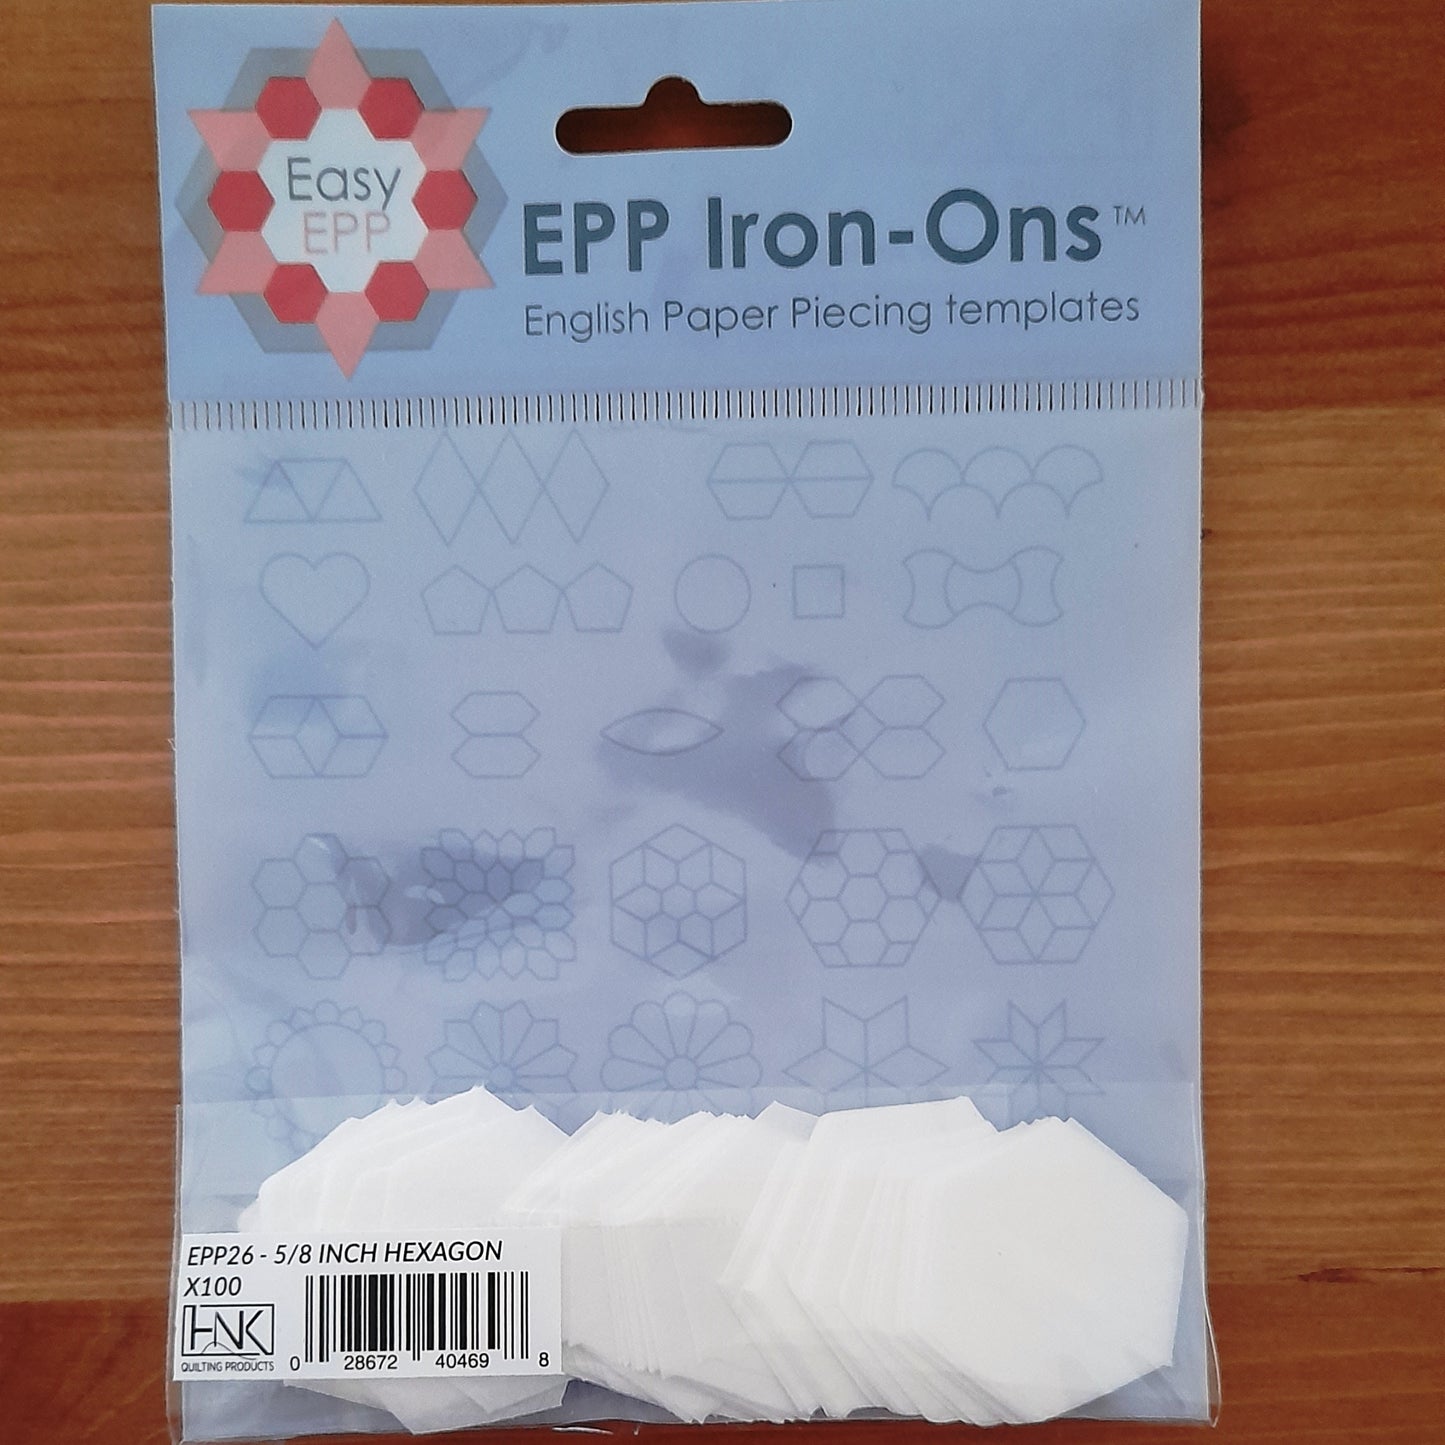 Hexagons 5/8", 100 fusible iron on papers for EPP English Paper Piecing Hugs n Kisses